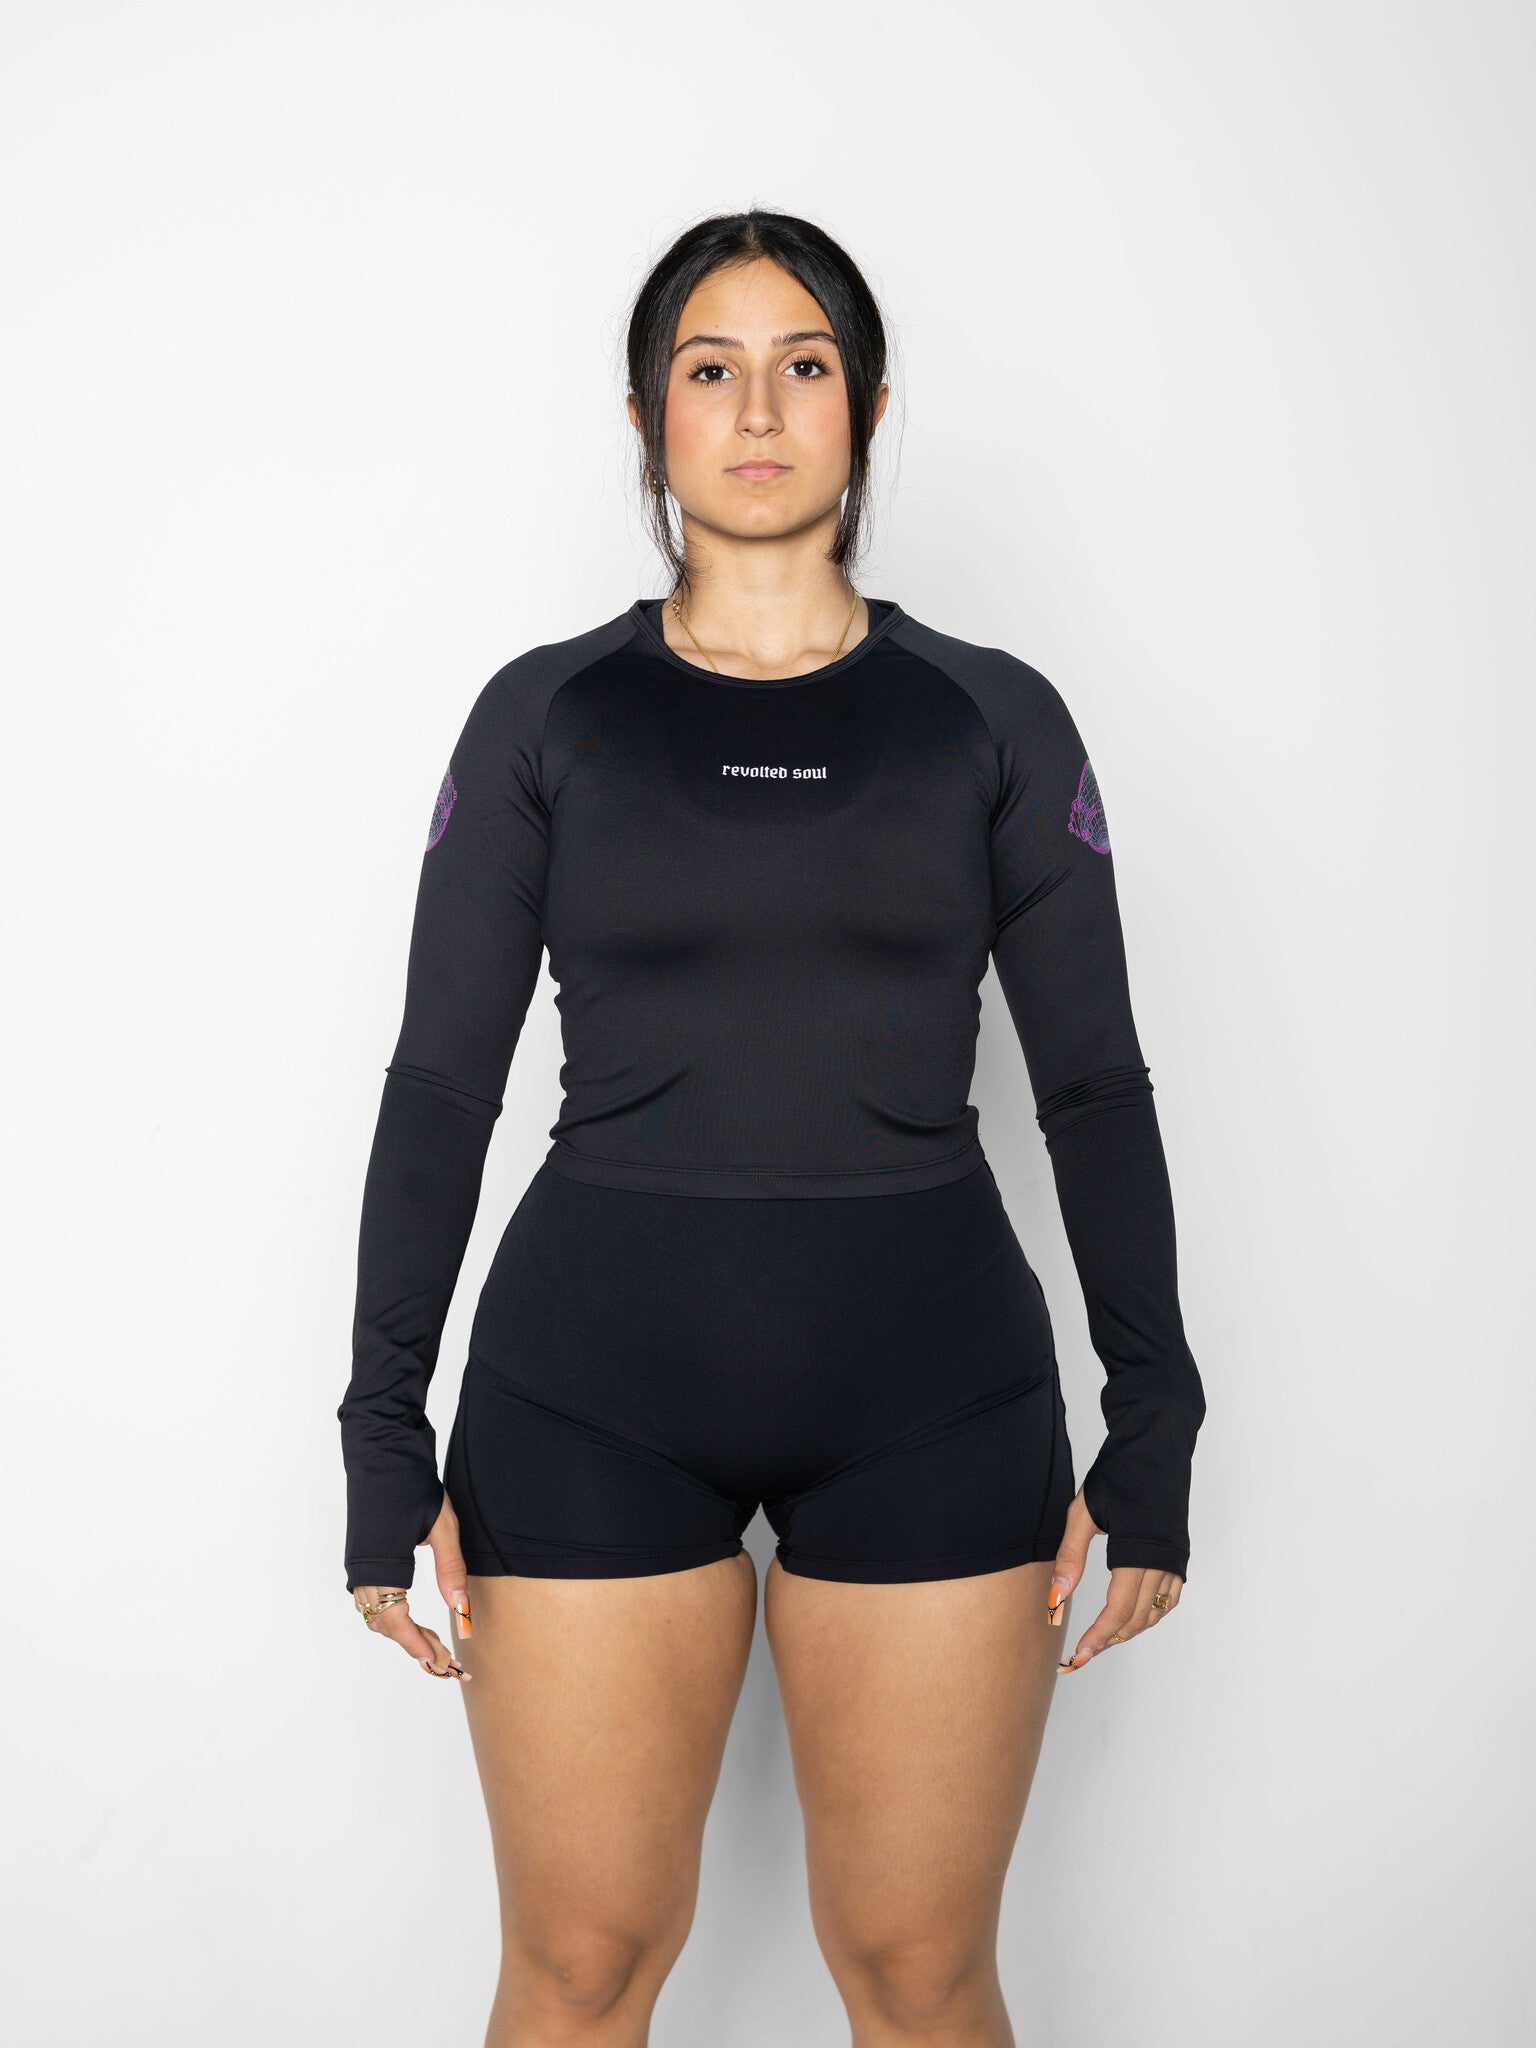 Womens Compression Long Sleeve